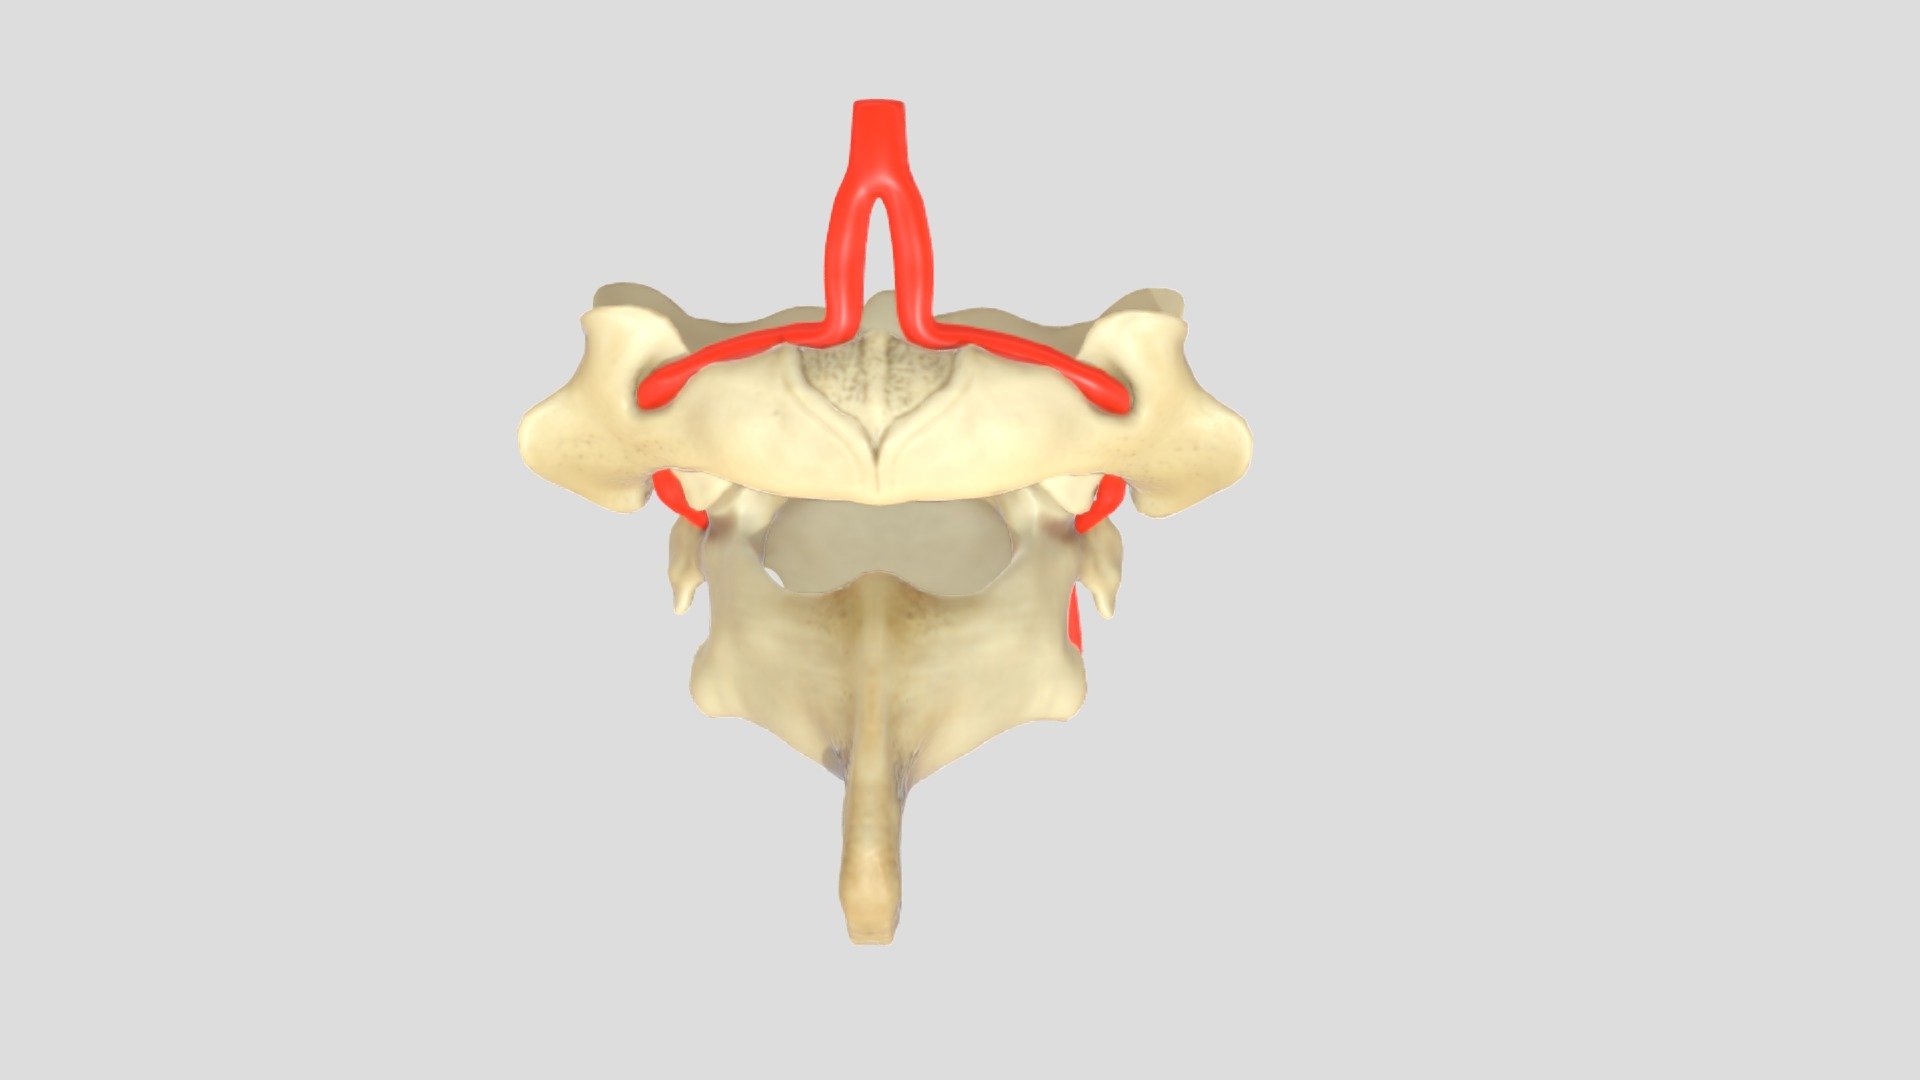 This model shows the atlas and axis together with the specific part of the vertebral artery. Where the two parts of the artery merge, the artery disappears into the dome of the skull. 
Later this week I'm adding annotations 3d model